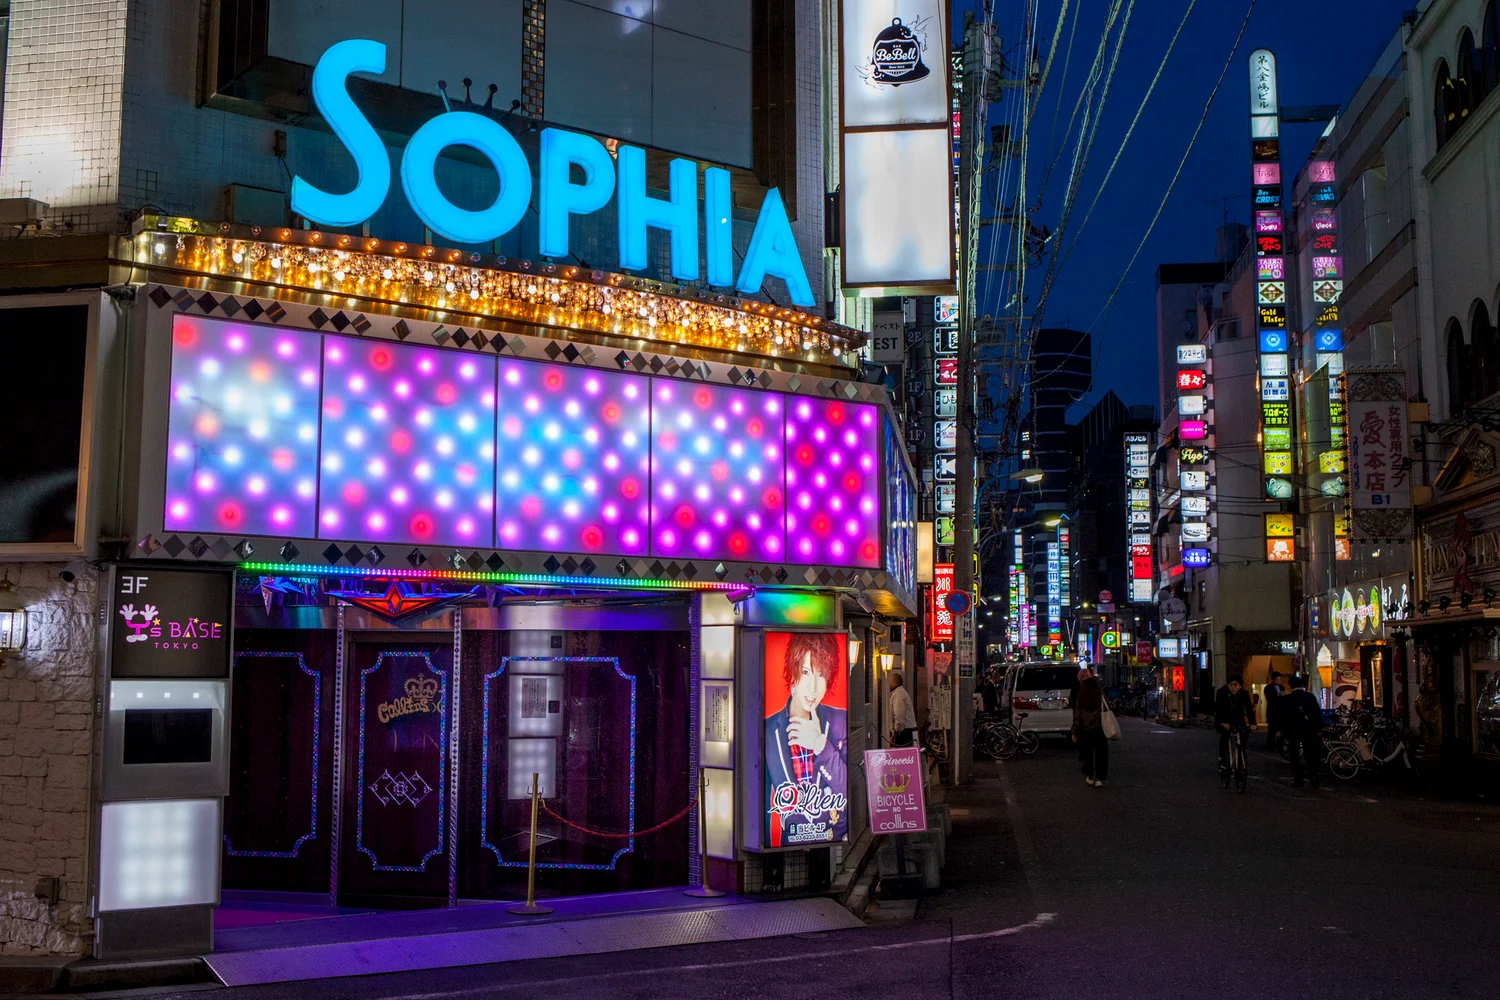 Visit a Japanese Tokyo Host Club: Lady’s Night Life With Locals in Shinjuku